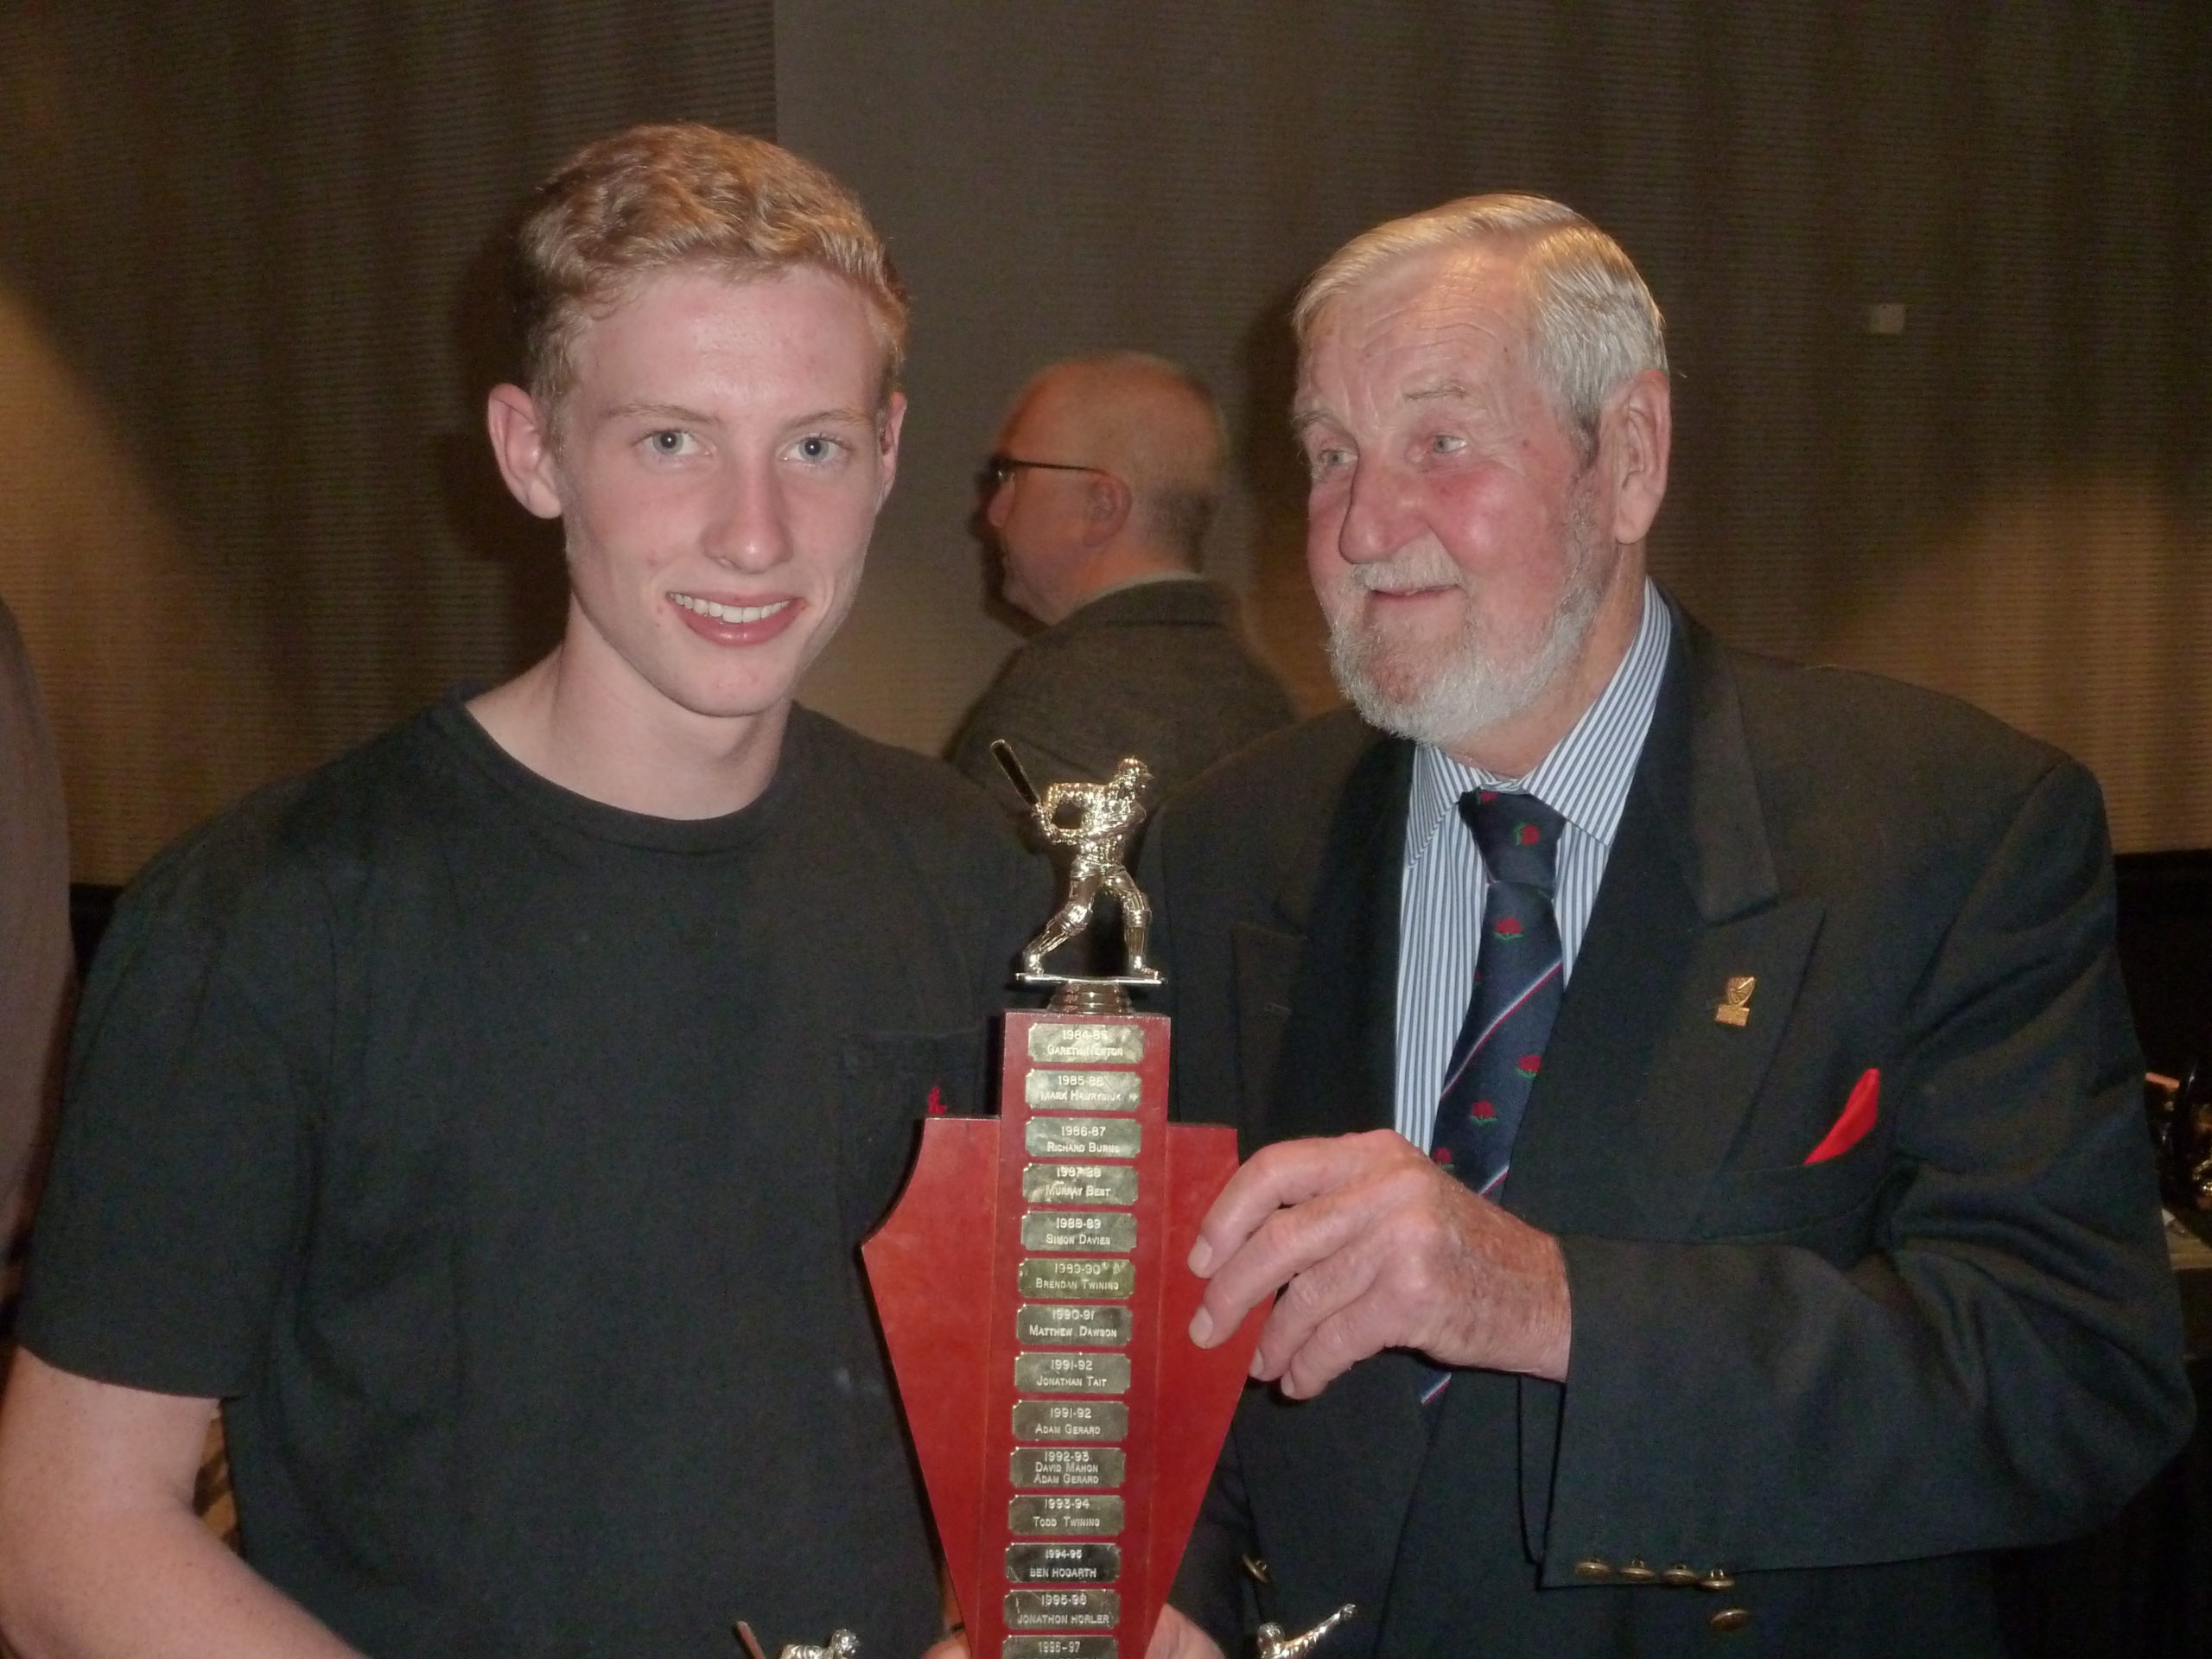 Junior Player of the Year - John Anderson with John Coulthard 2013/14.